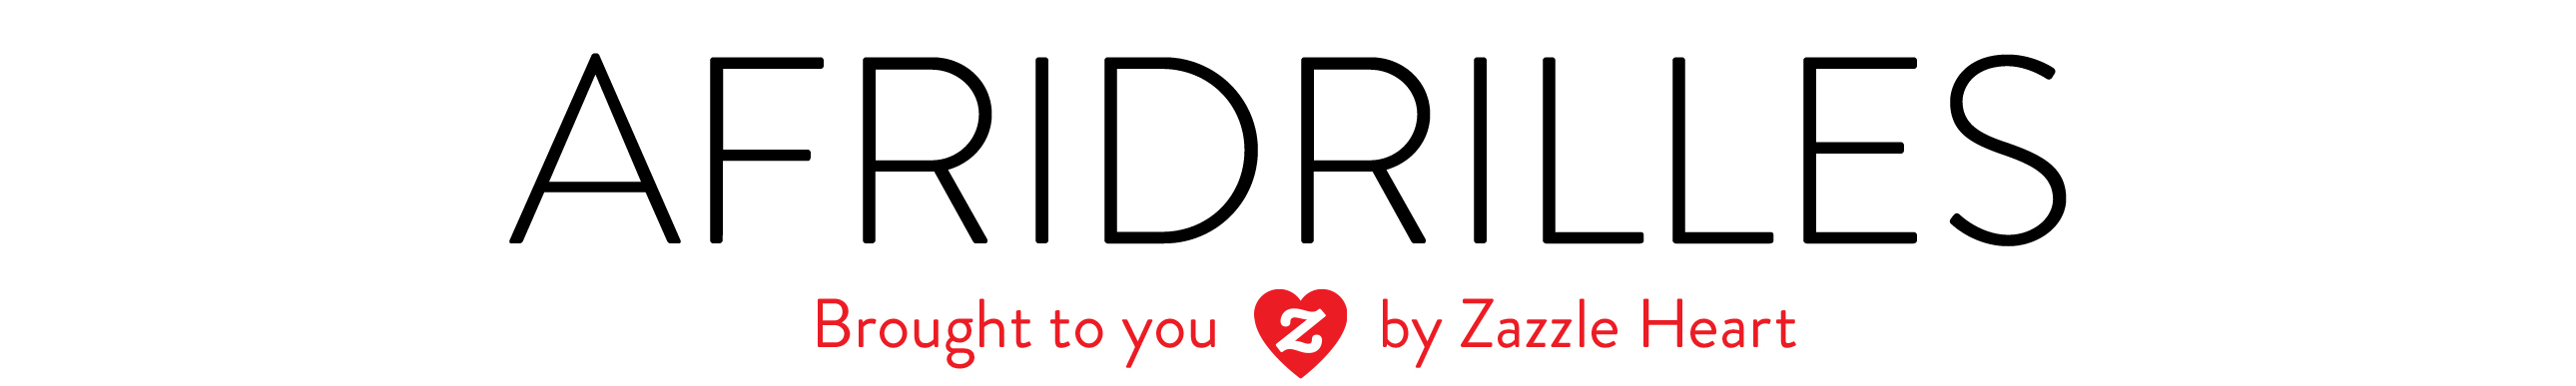 Afridrilles - Brought to you by Zazzle Heart